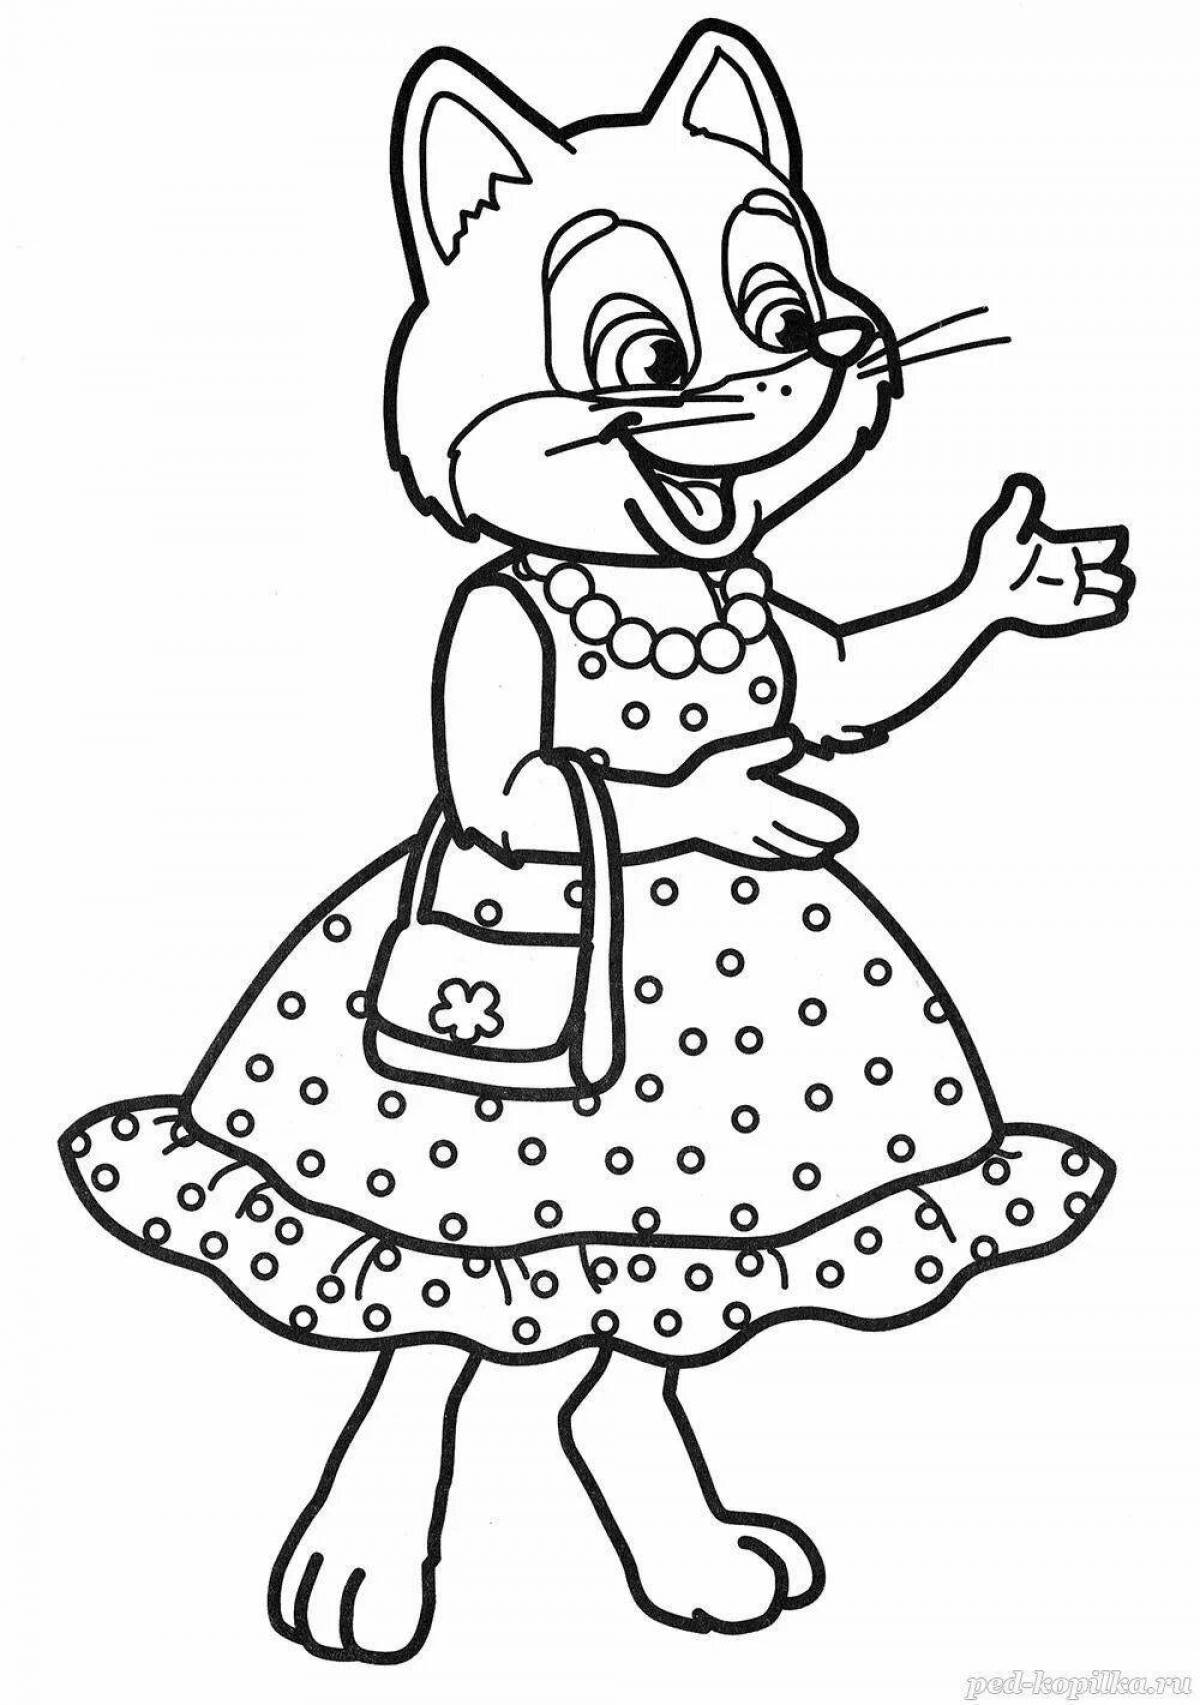 Charming fox and rabbit coloring book